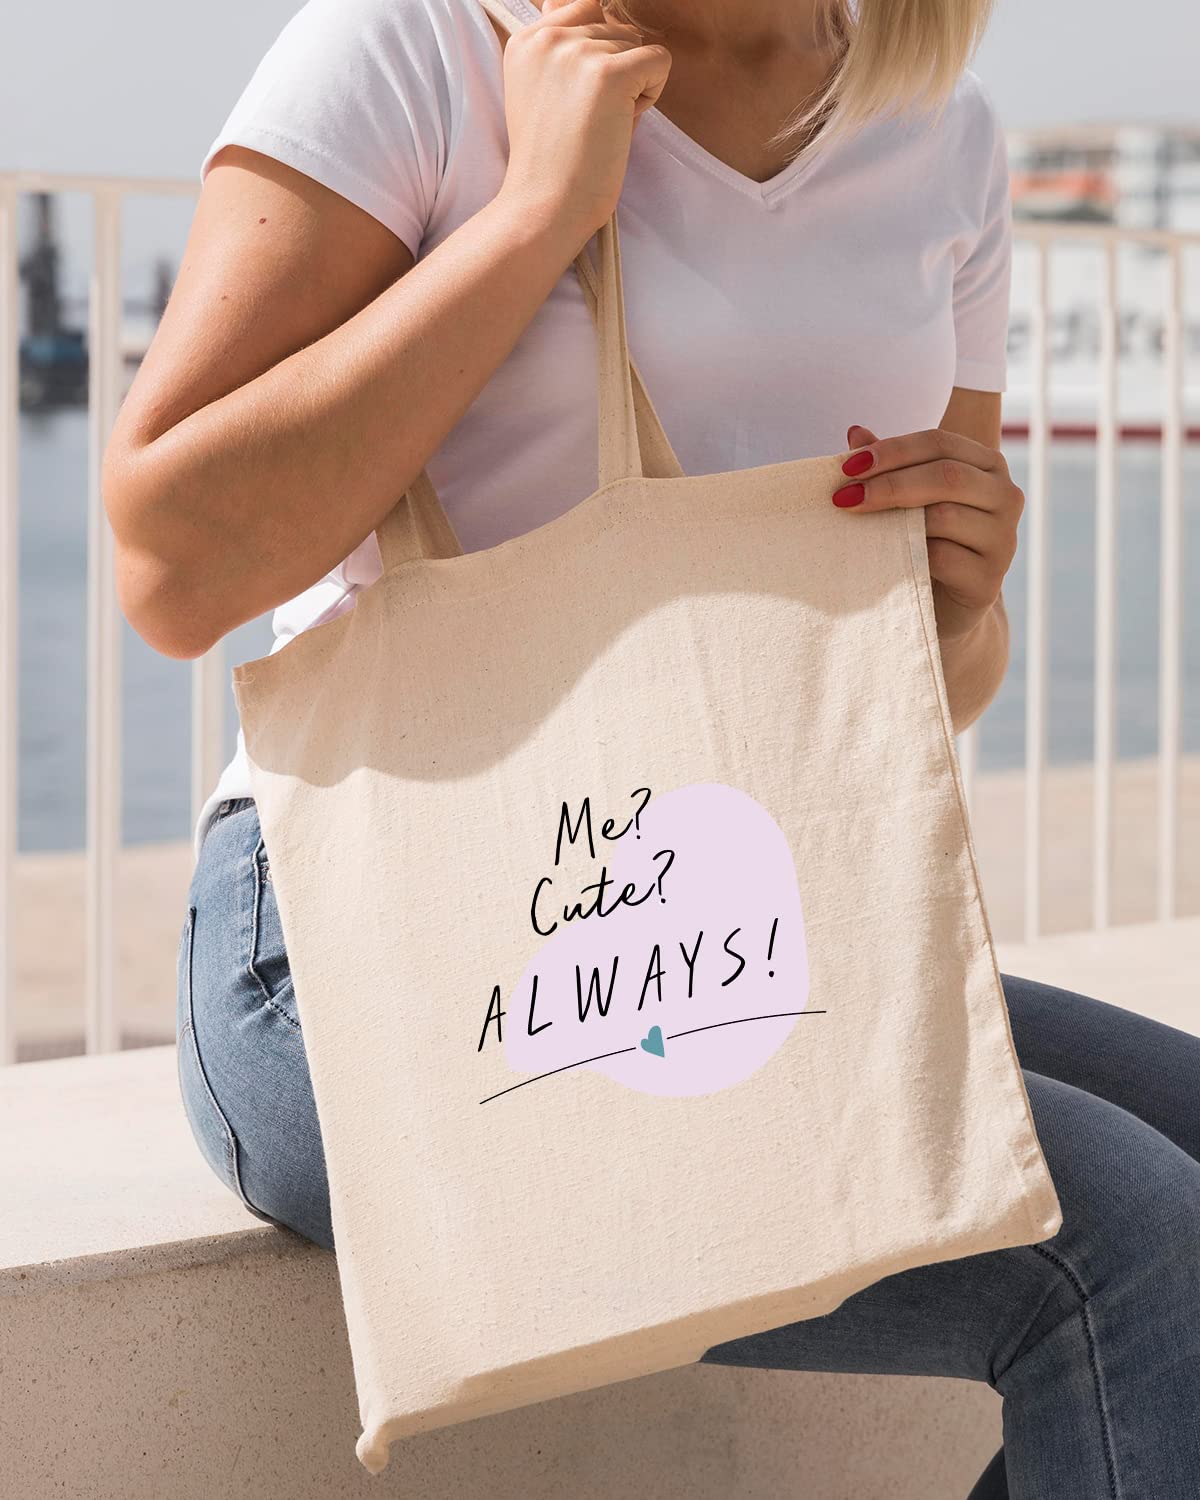 The Pink Magnet Me? Cute? Always! Tote Bag - Canvas Tote Bag for Women | Printed Multipurpose Cotton Bags | Cute Hand Bag for Girls | Best for College, Travel, Grocery | Reusable Shopping Bag | Eco-Friendly Tote Bag